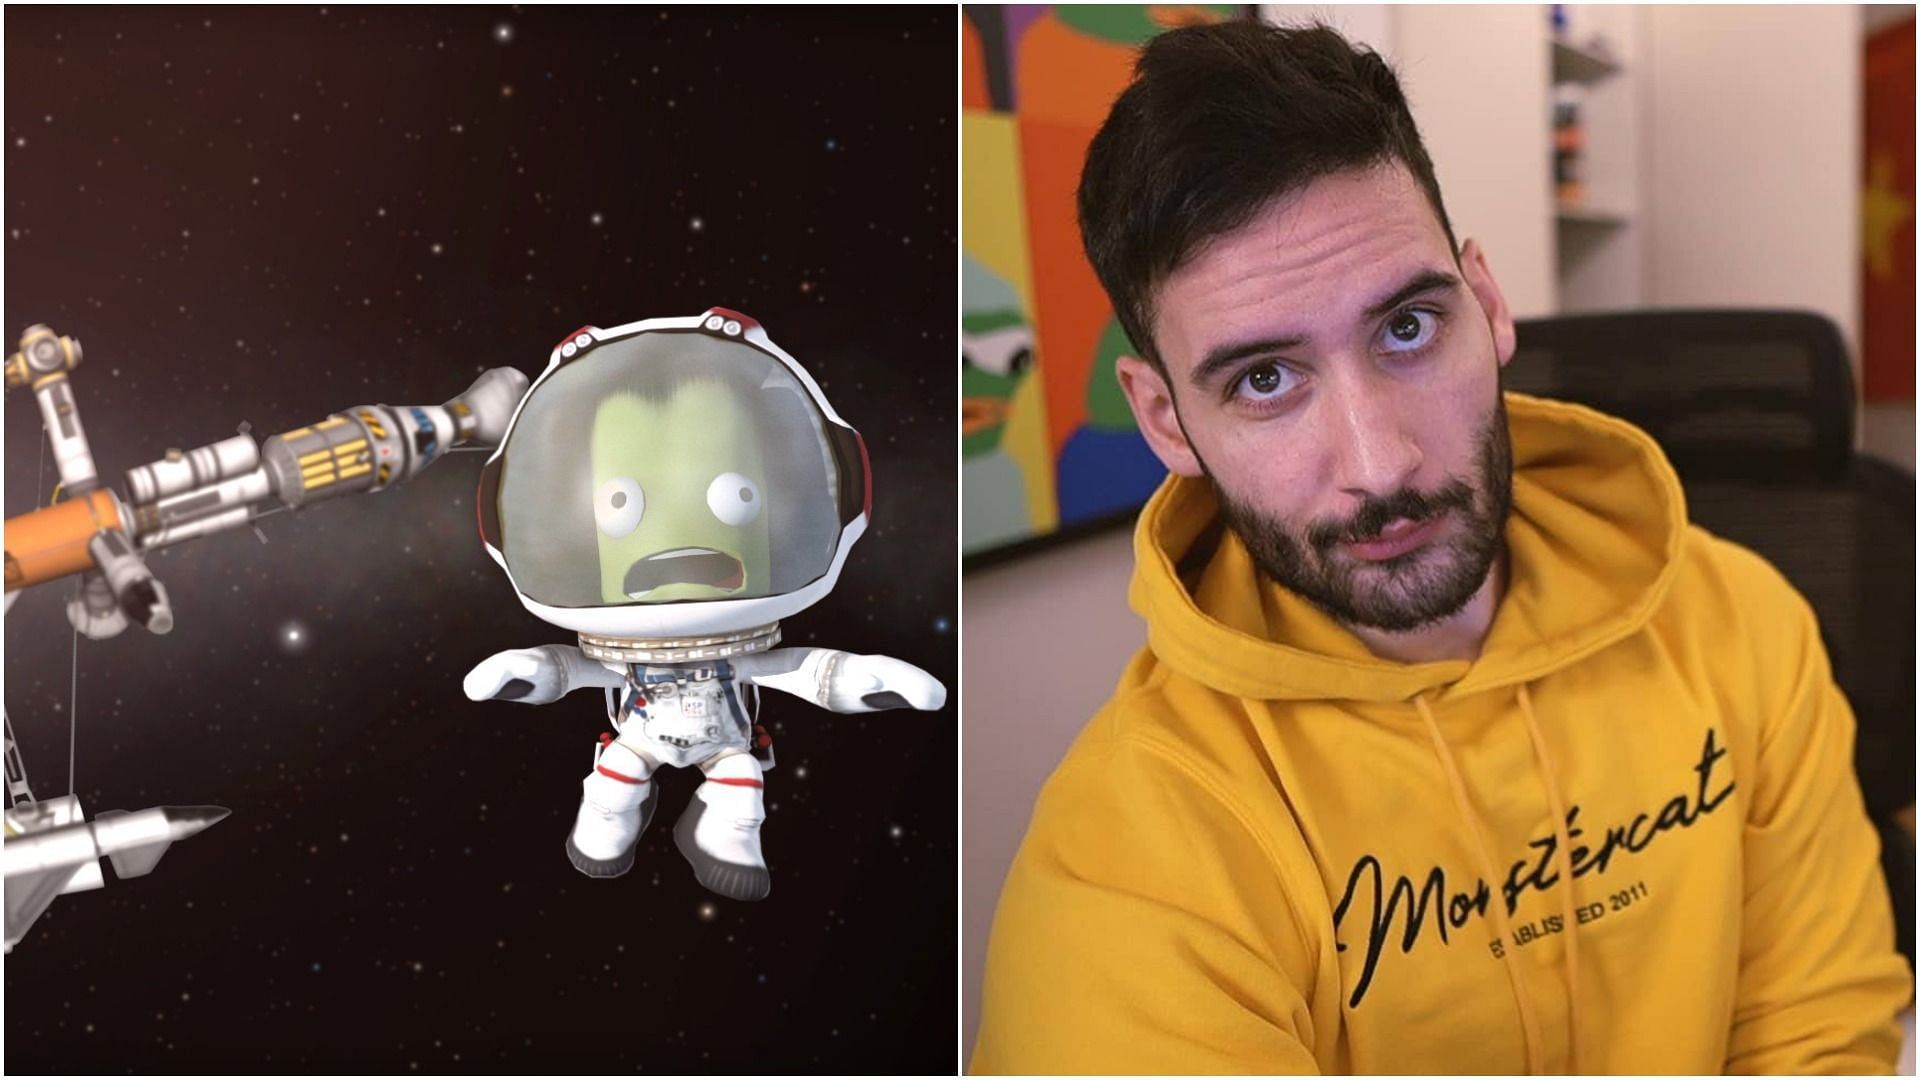 NymN attempts to launch a rocket into the deep reaches of space, but can only barely get it off the ground (Image via Sportskeeda)